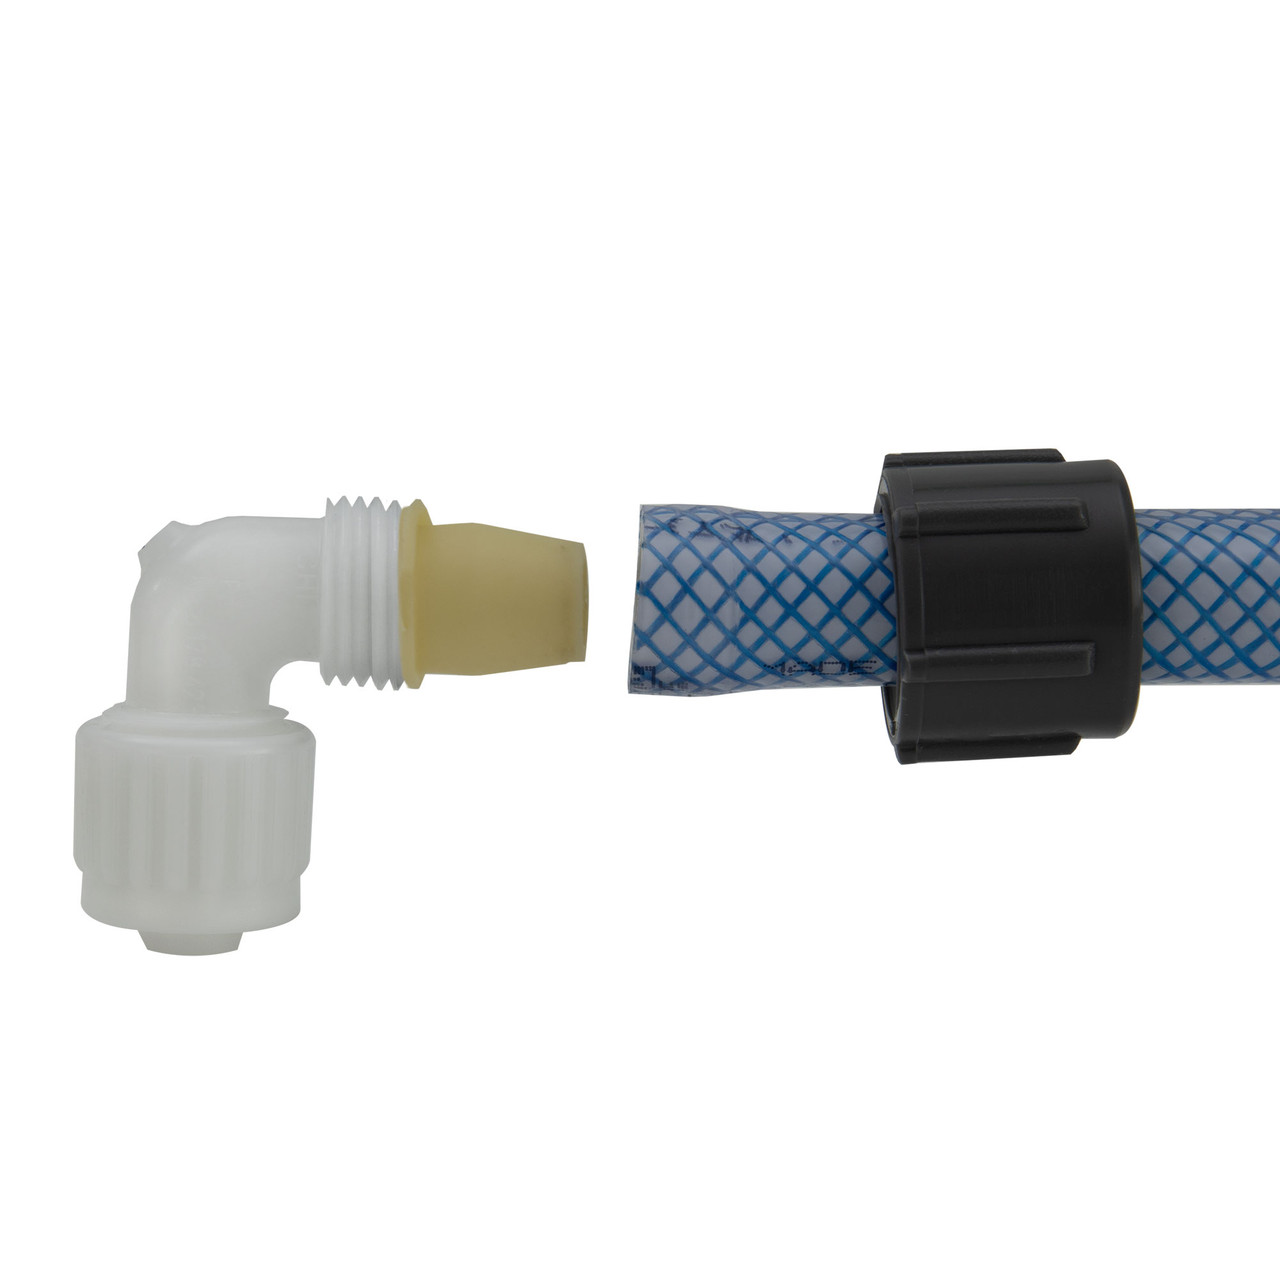 1/4 x 6' PEX Ice Maker Line Kit with Quick Connect Adapters